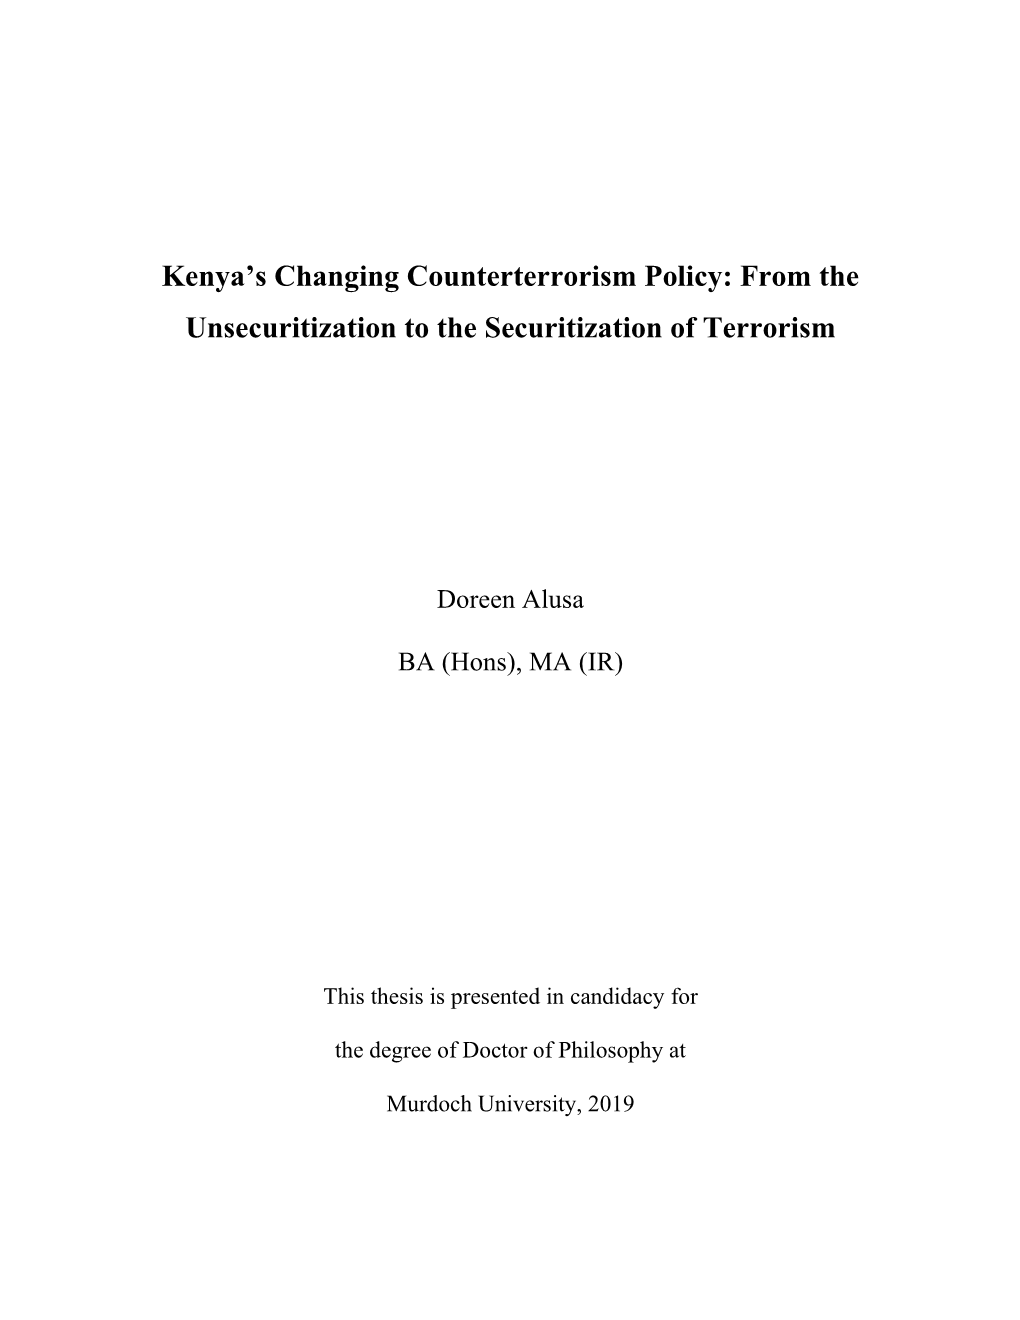 Kenya's Changing Counterterrorism Policy: from the Unsecuritization To